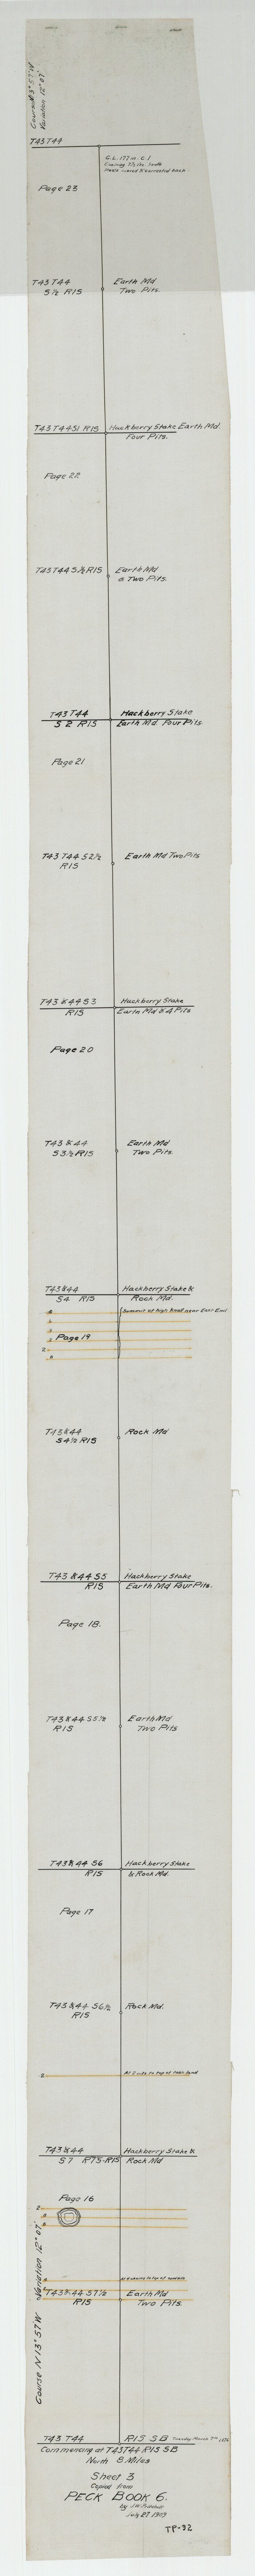 93173, Sheet 3 copied from Peck Book 6 [Strip Map showing T. & P. connecting lines], Twichell Survey Records